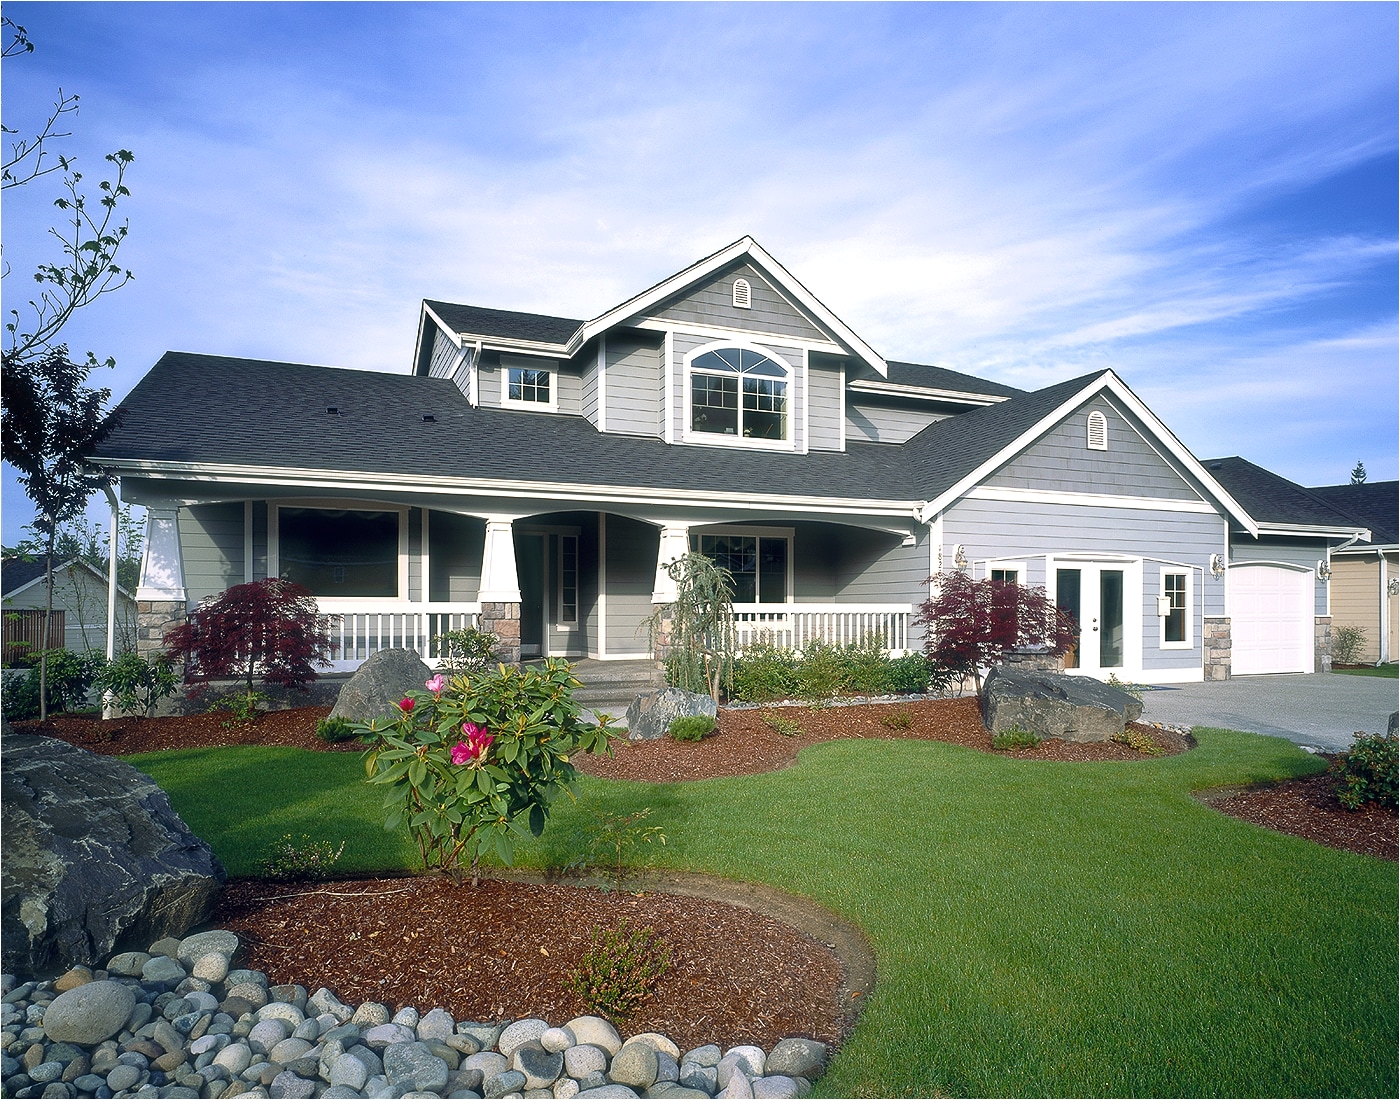 gray craftsman style home